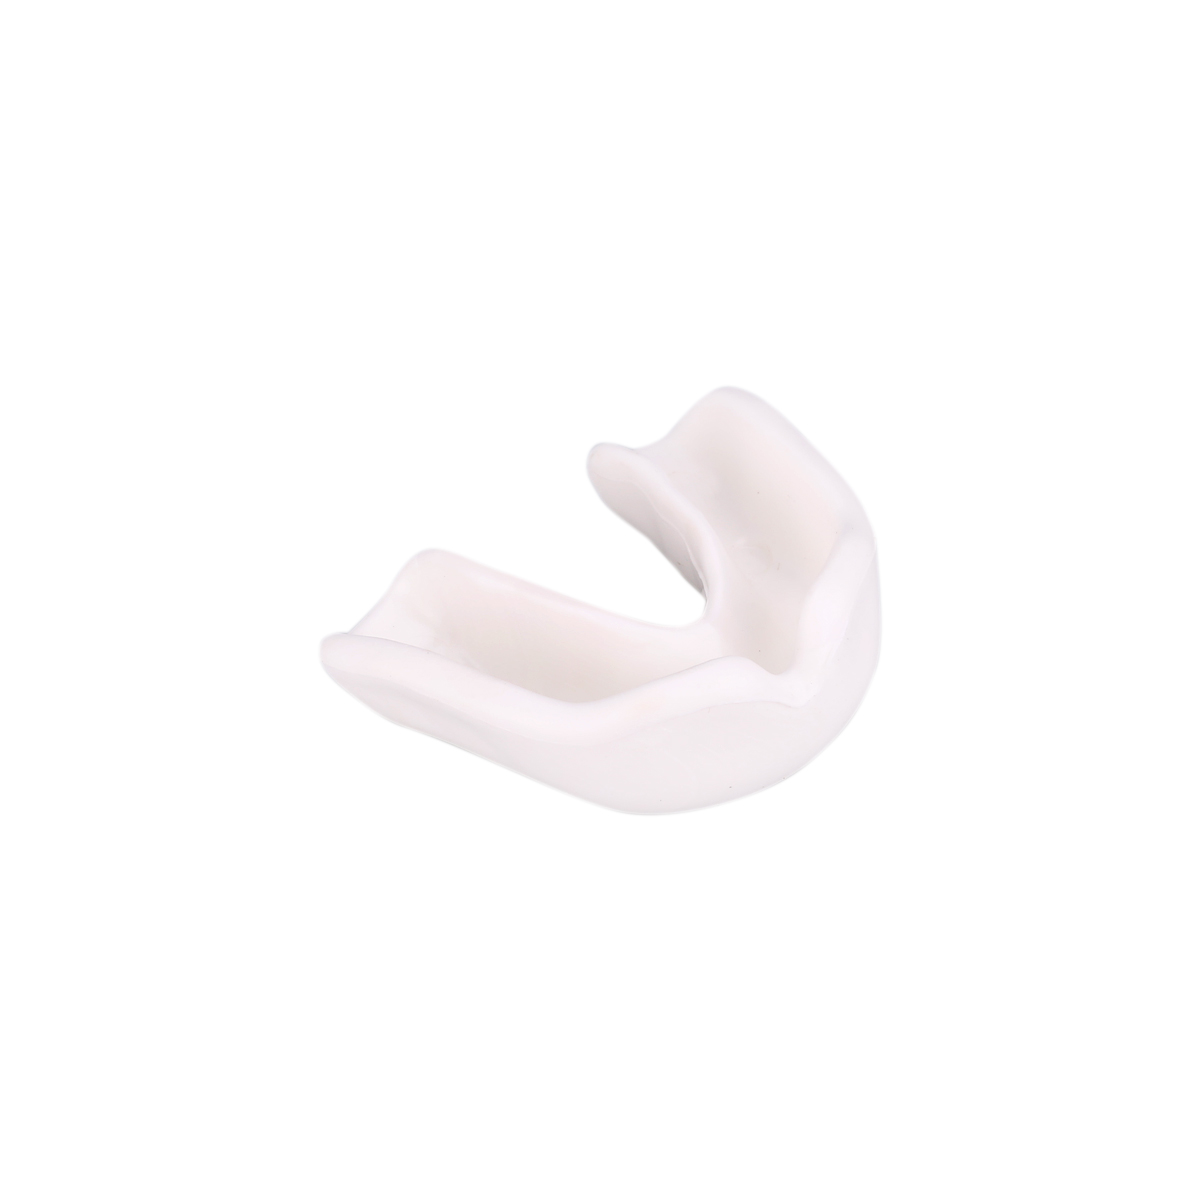 Protector Bucal Gilbert Mouthguard Anatomic Sr,  image number null